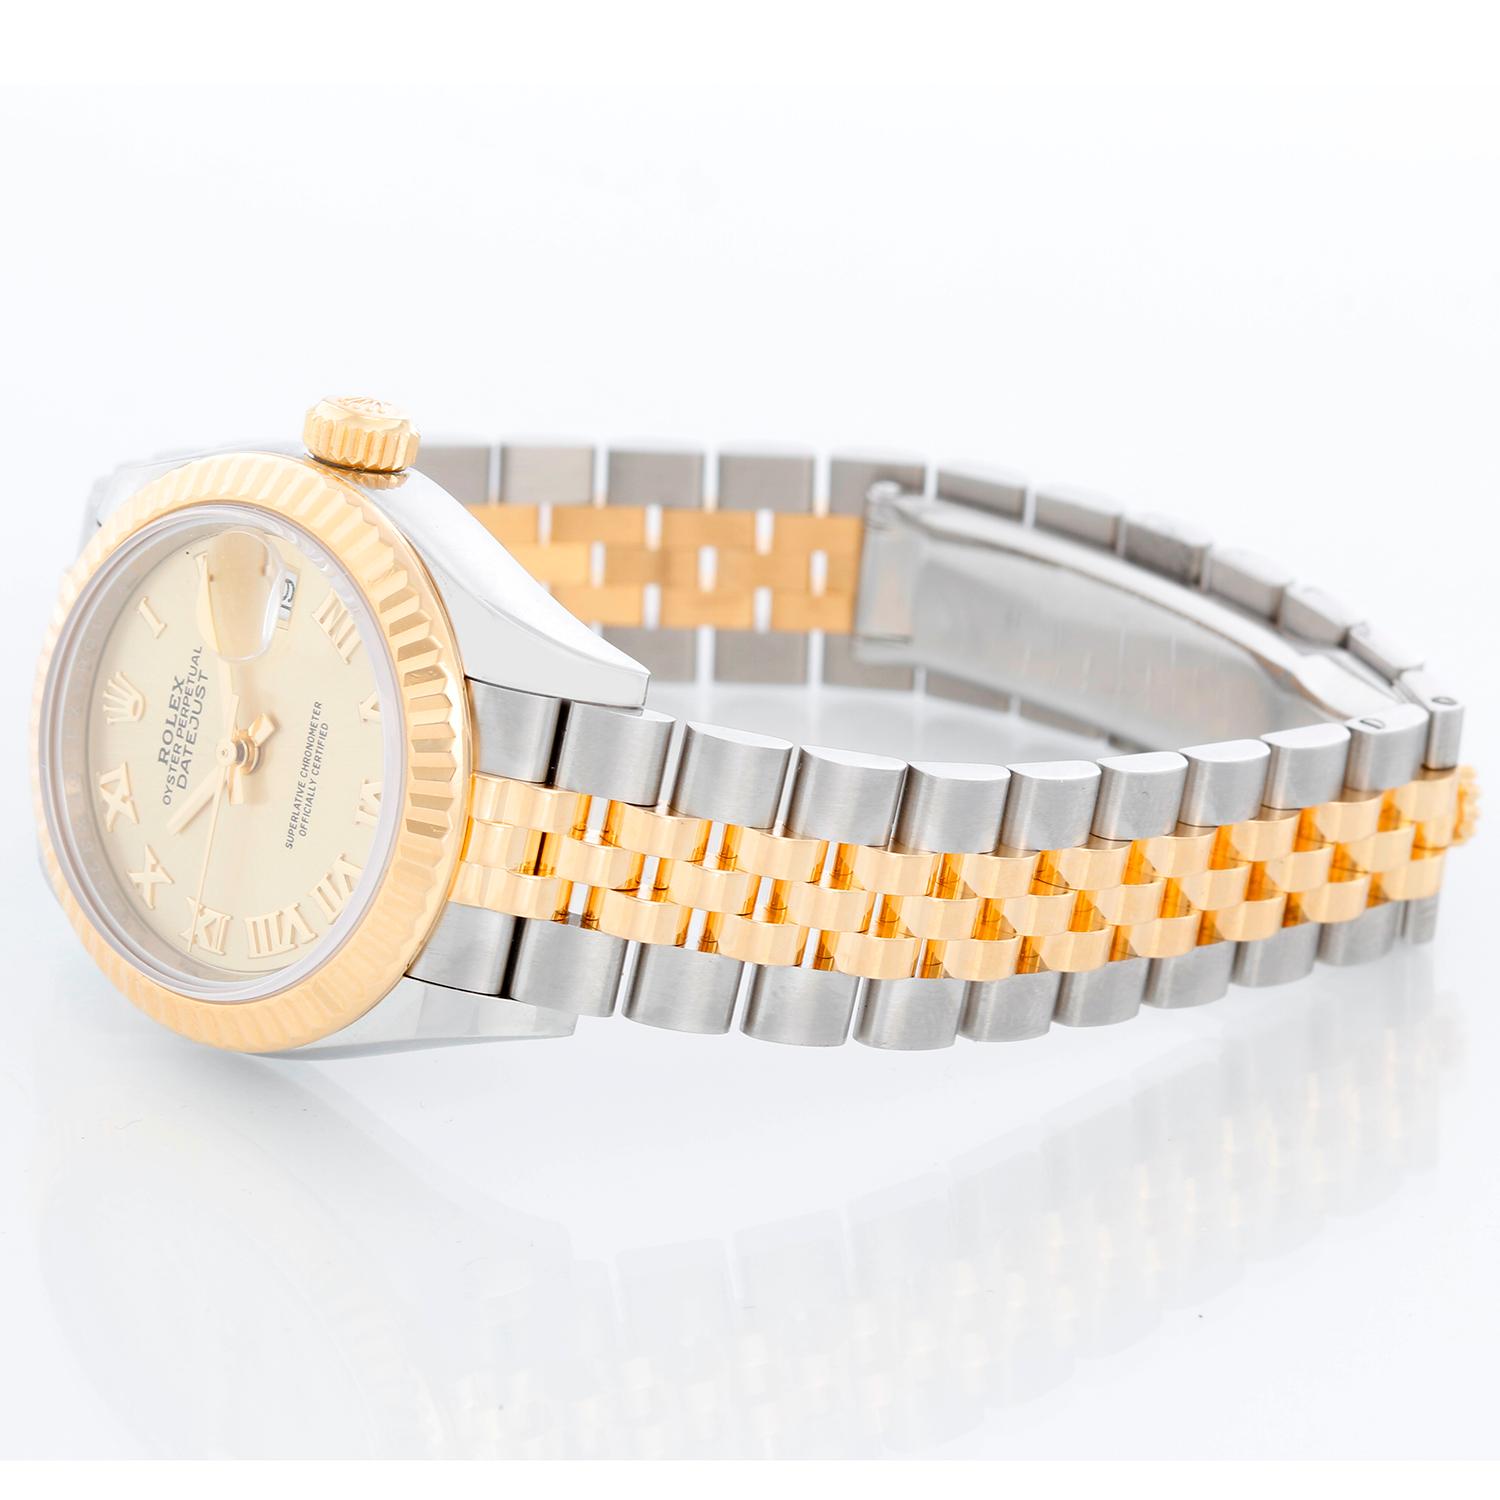 Ladies Rolex Datejust 28mm 18K Yellow Gold and Stainless Steel 279173 - Automatic winding, 31 jewels, Quickset date, sapphire crystal. 18K Yellow gold and Stainless Steel ( 28 mm). Champagne Roman dial. Two-Tone Jubilee bracelet. Pre-owned with